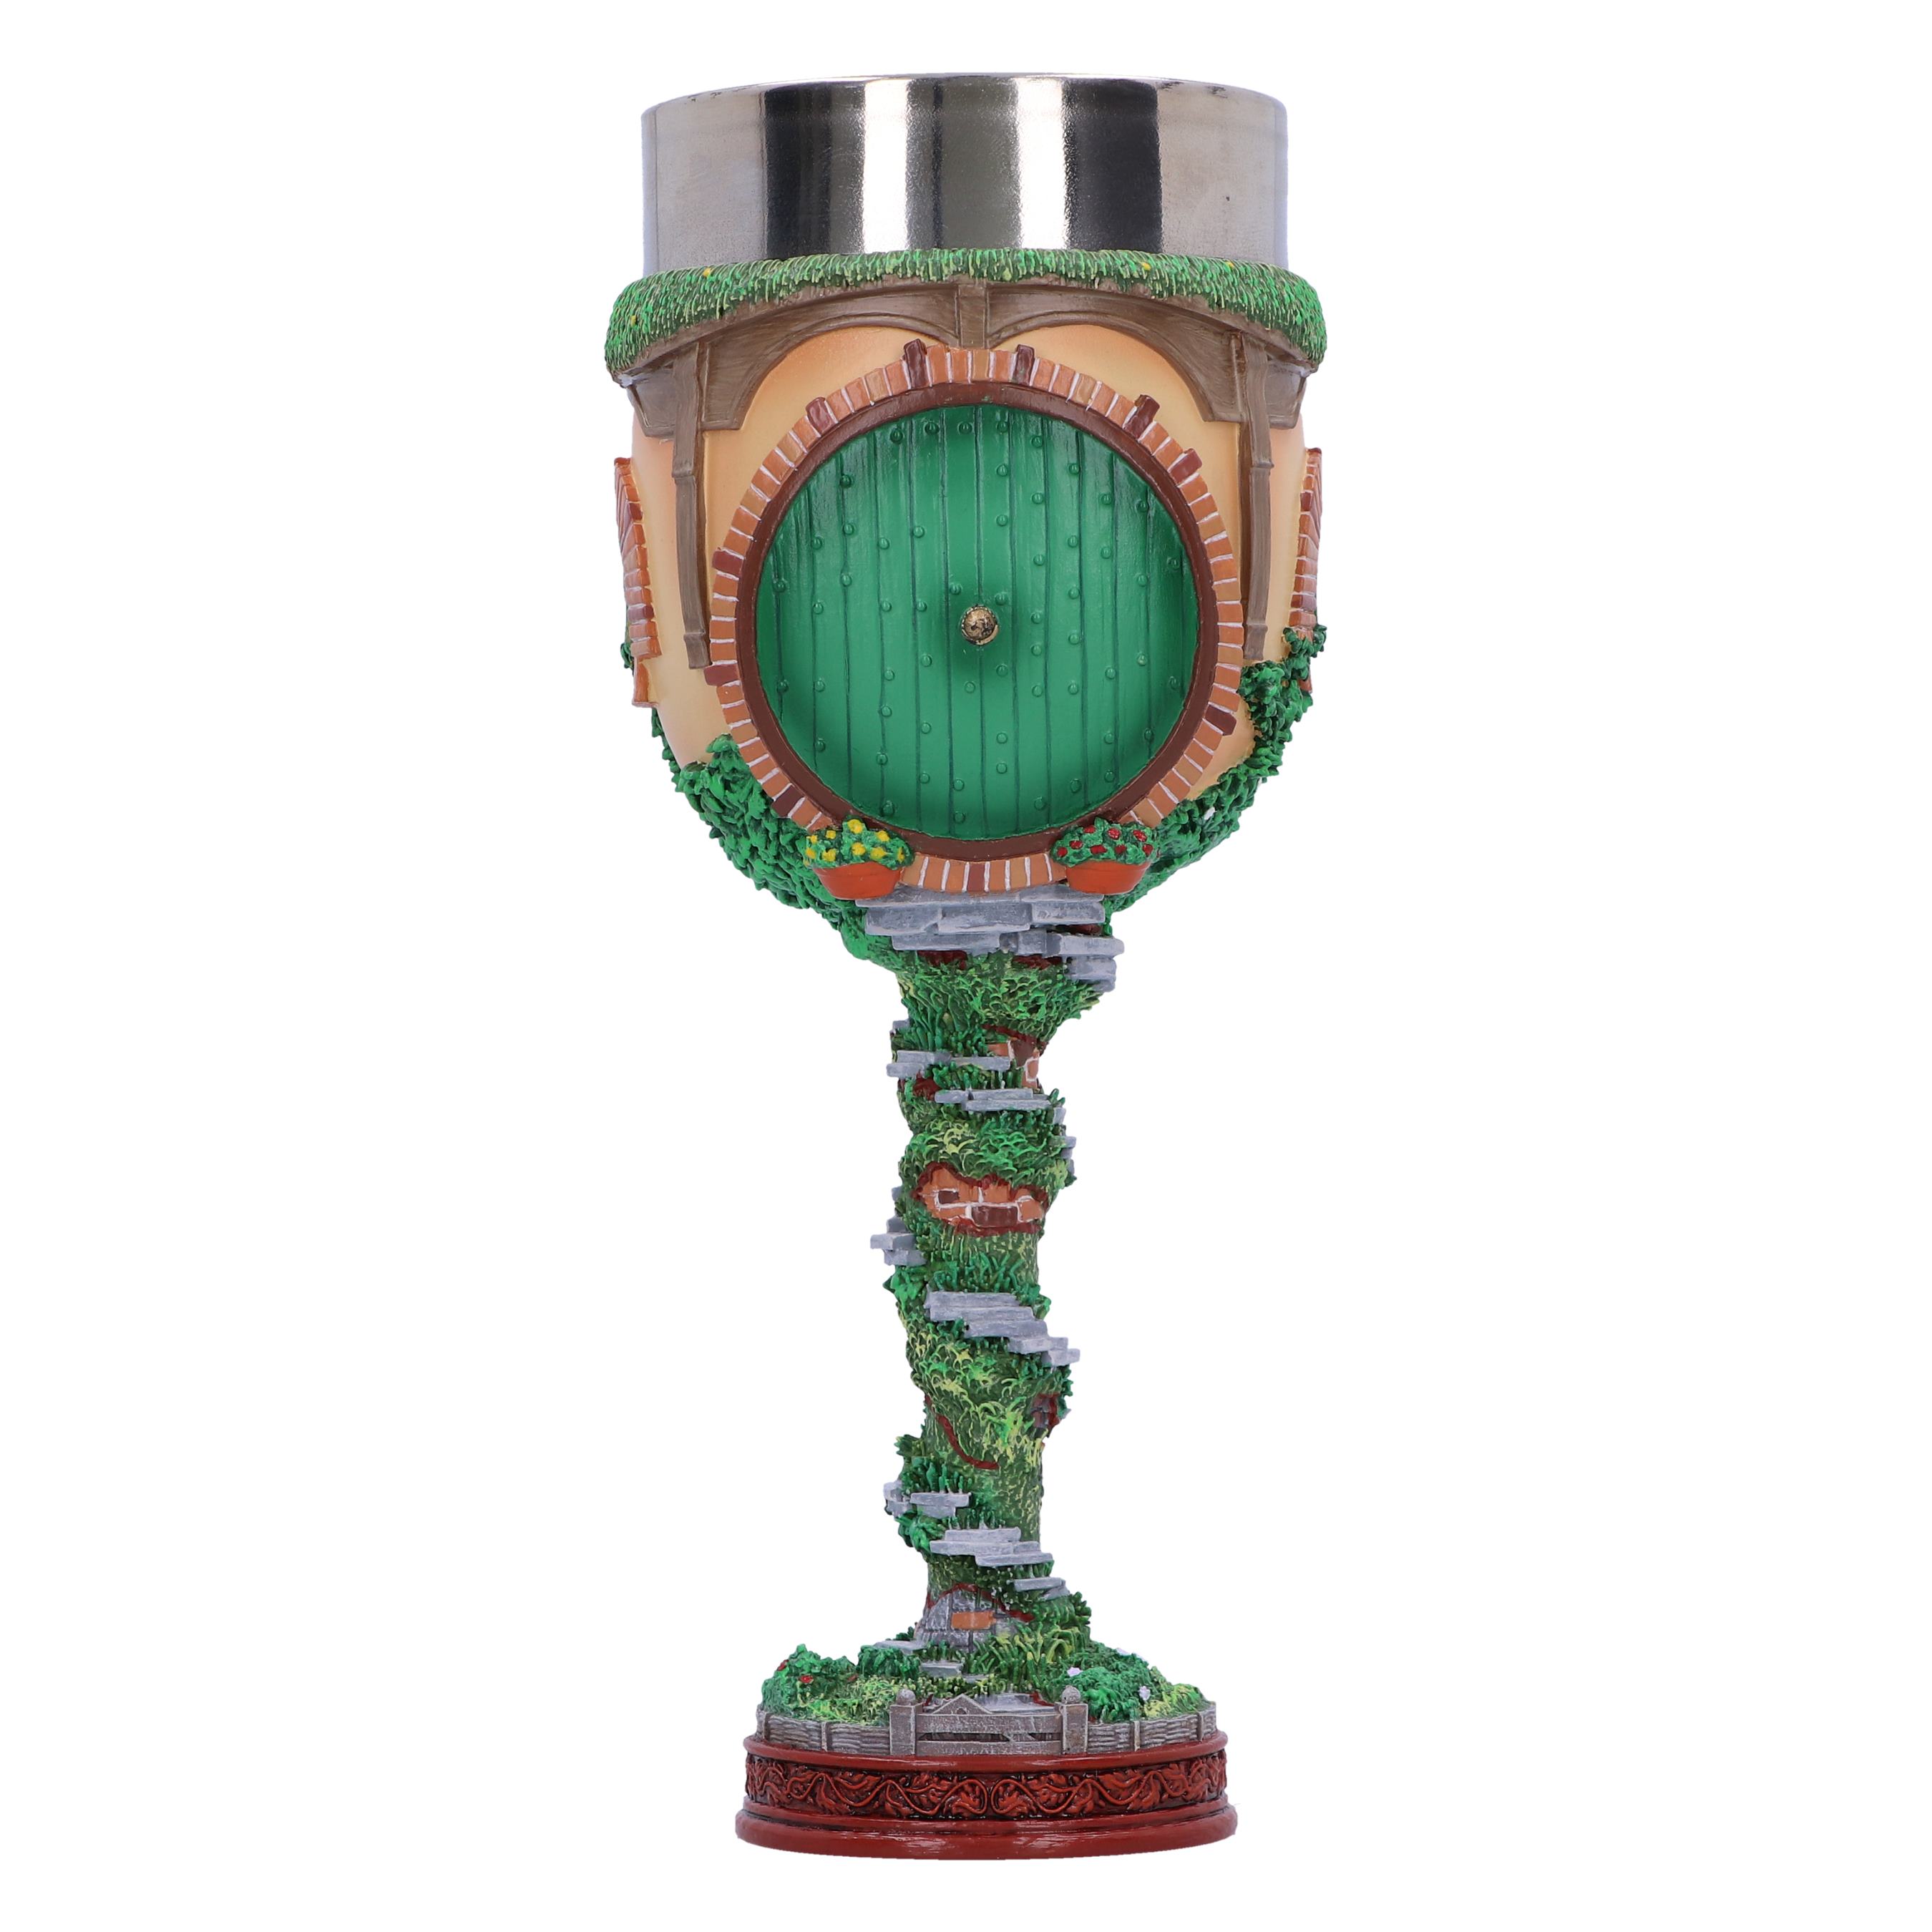 Lord Of The Rings The Shire Goblet - Fan-shop